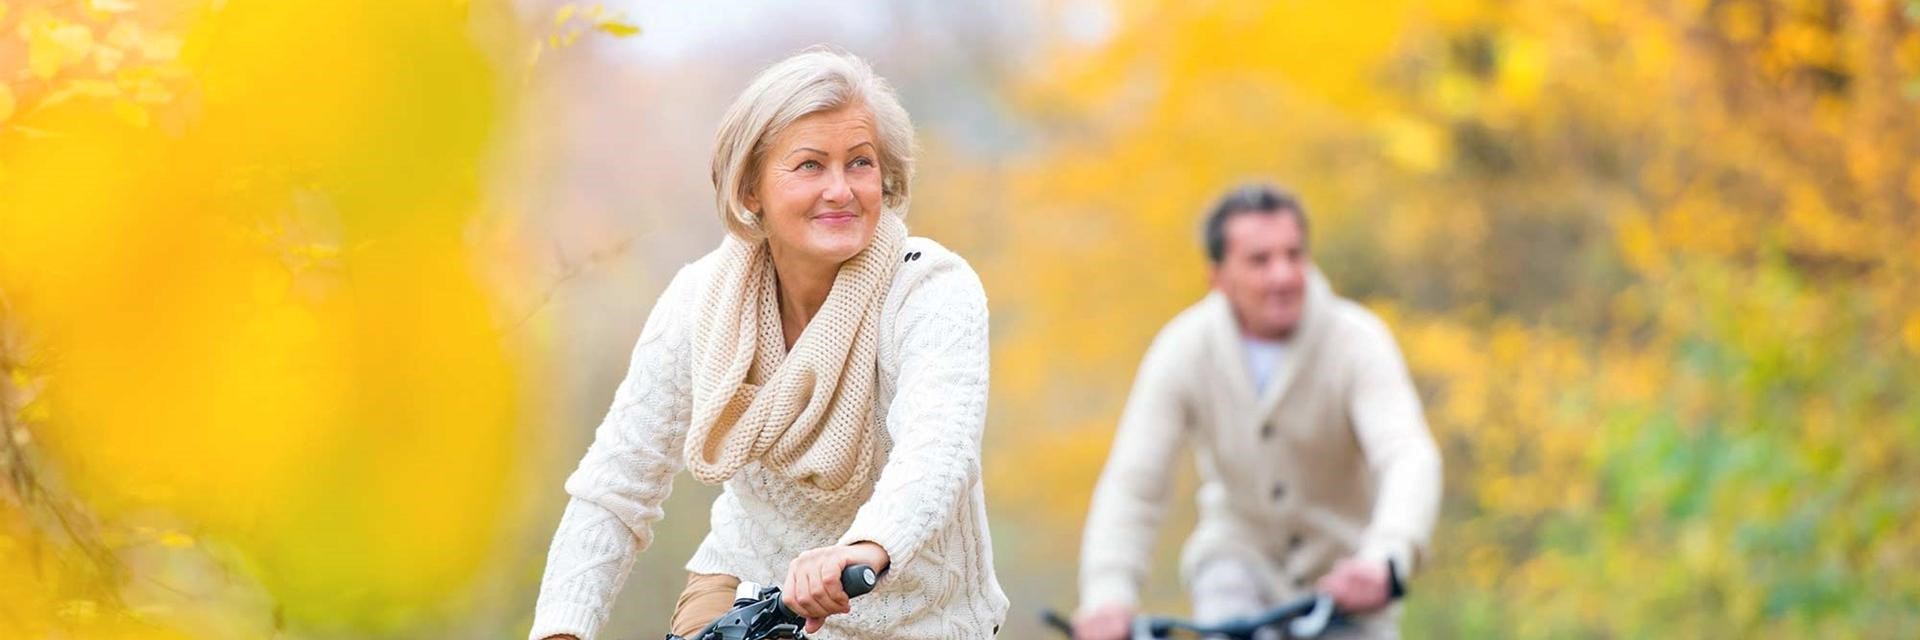 Older couple cycling through yellow flowers